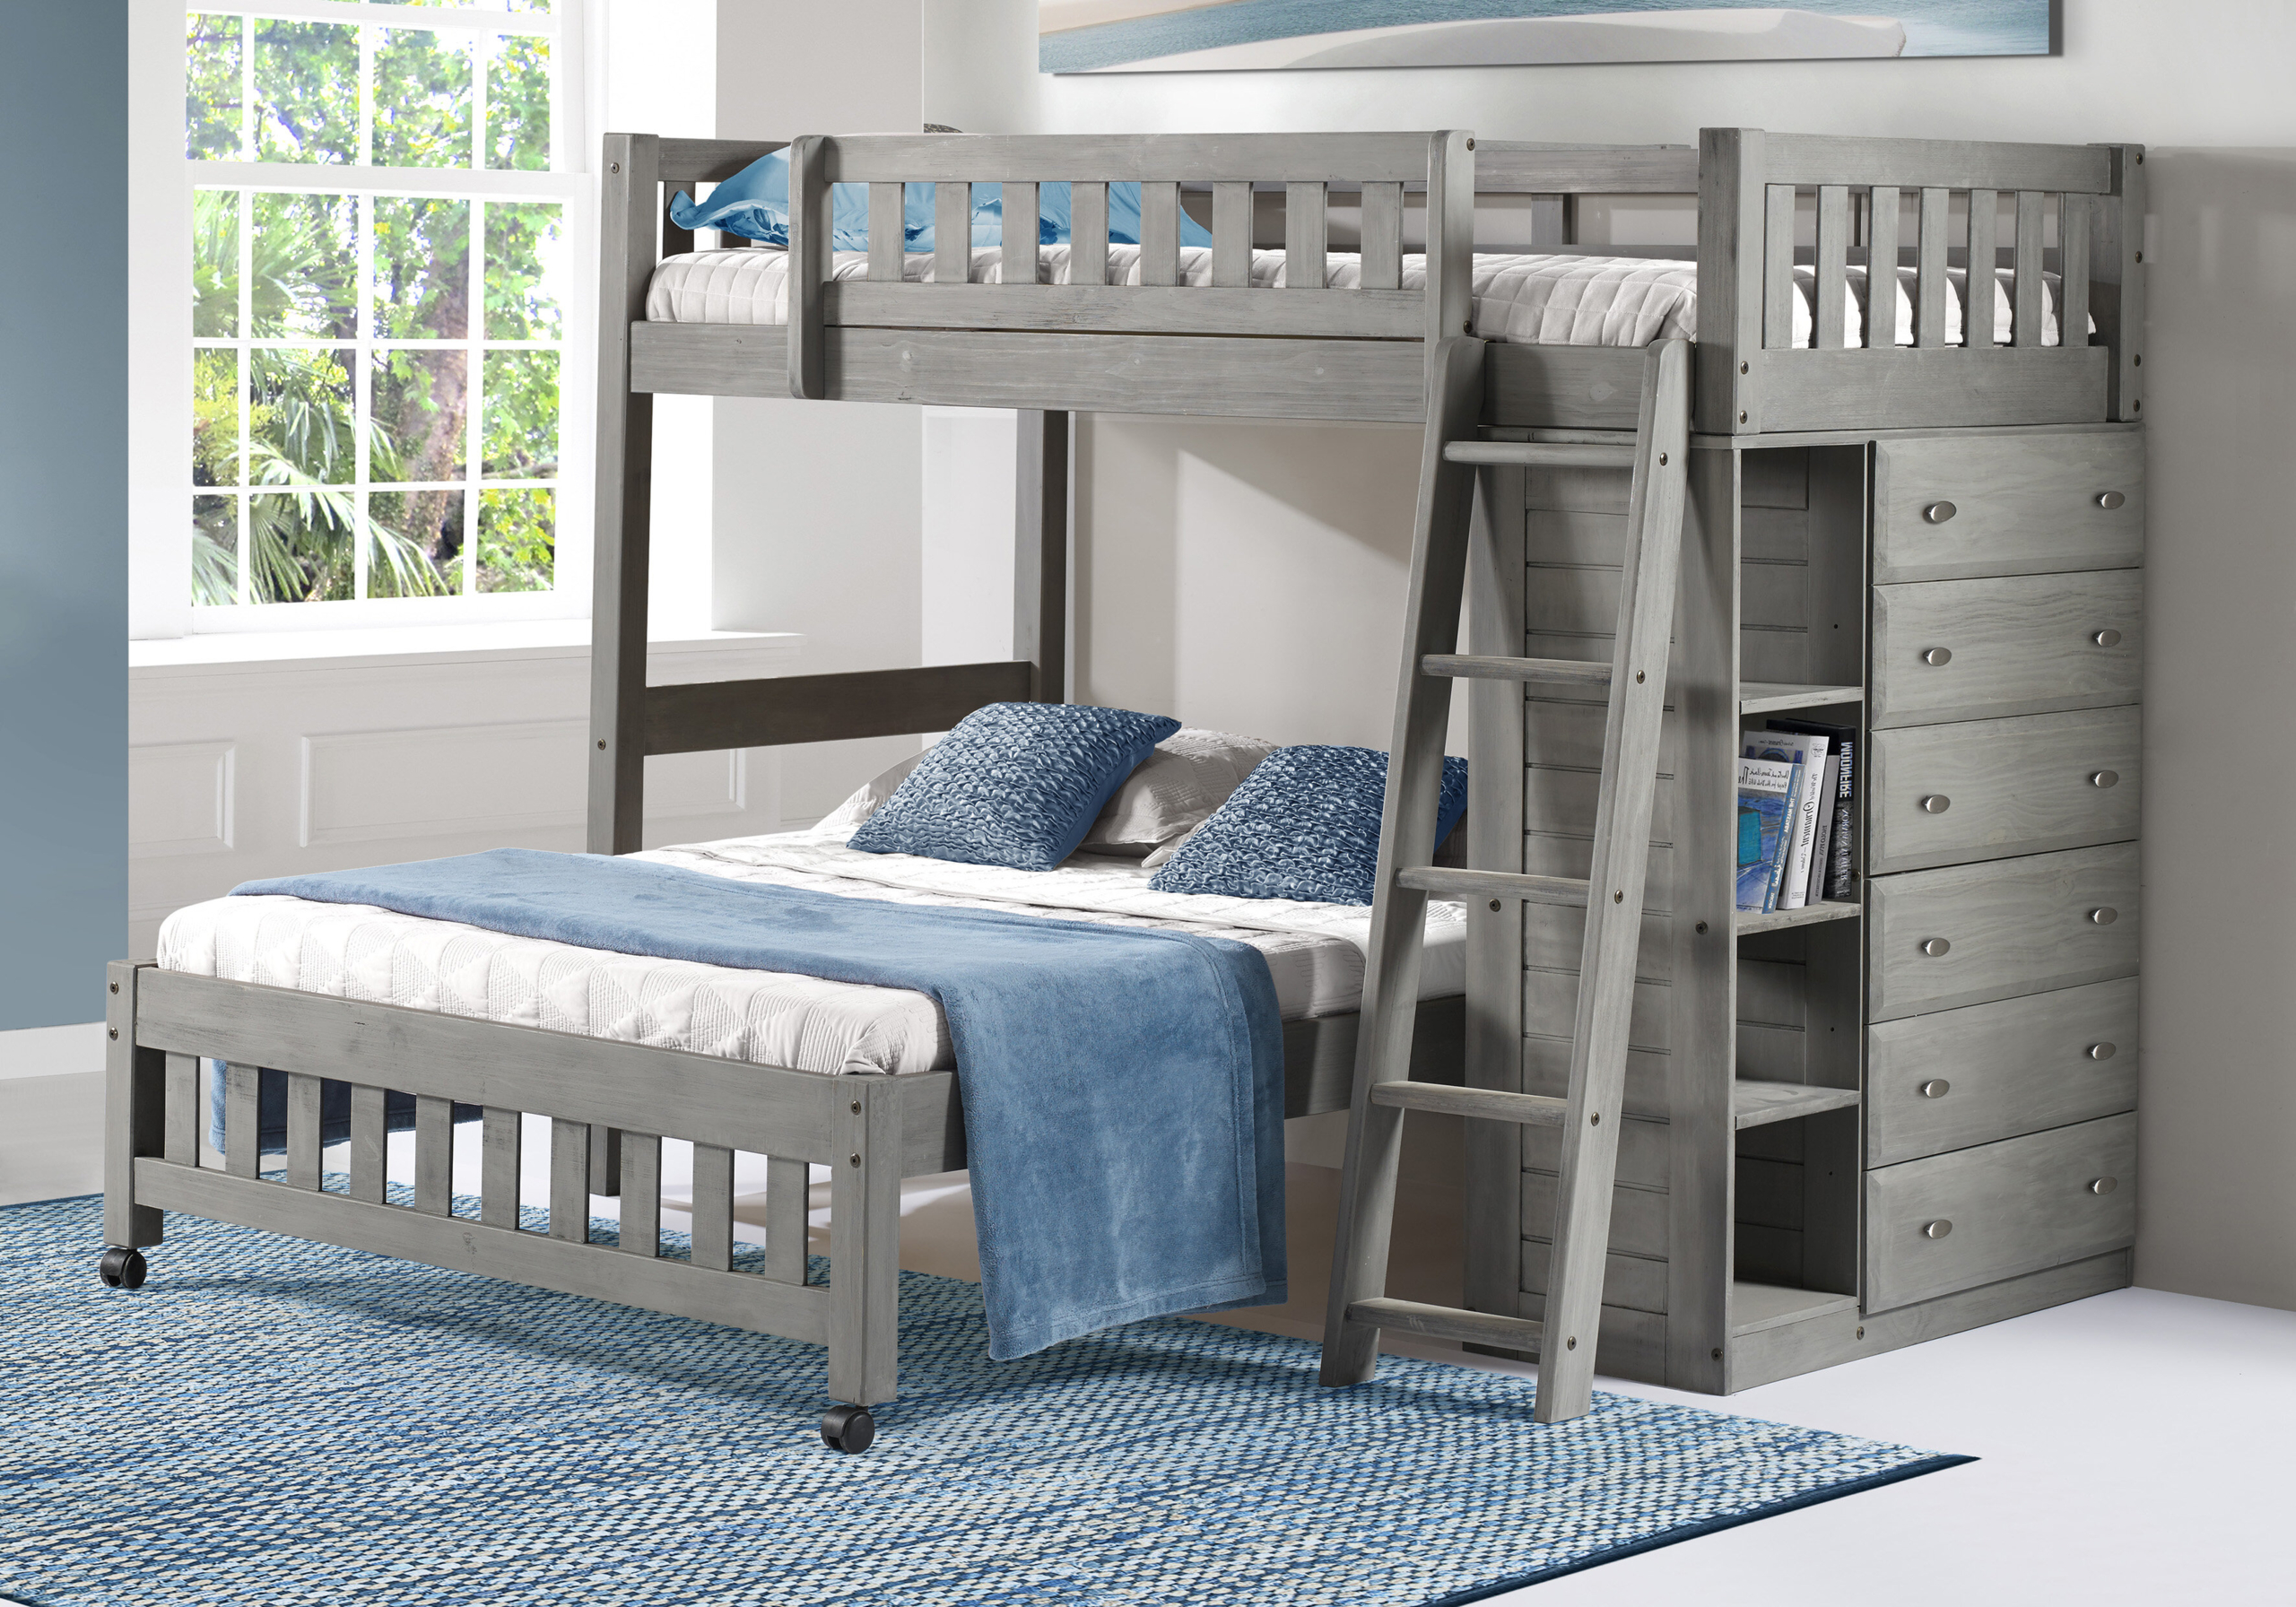 Bunk Beds With Dressers Visualhunt, Bunk Beds With Full Size Bottom